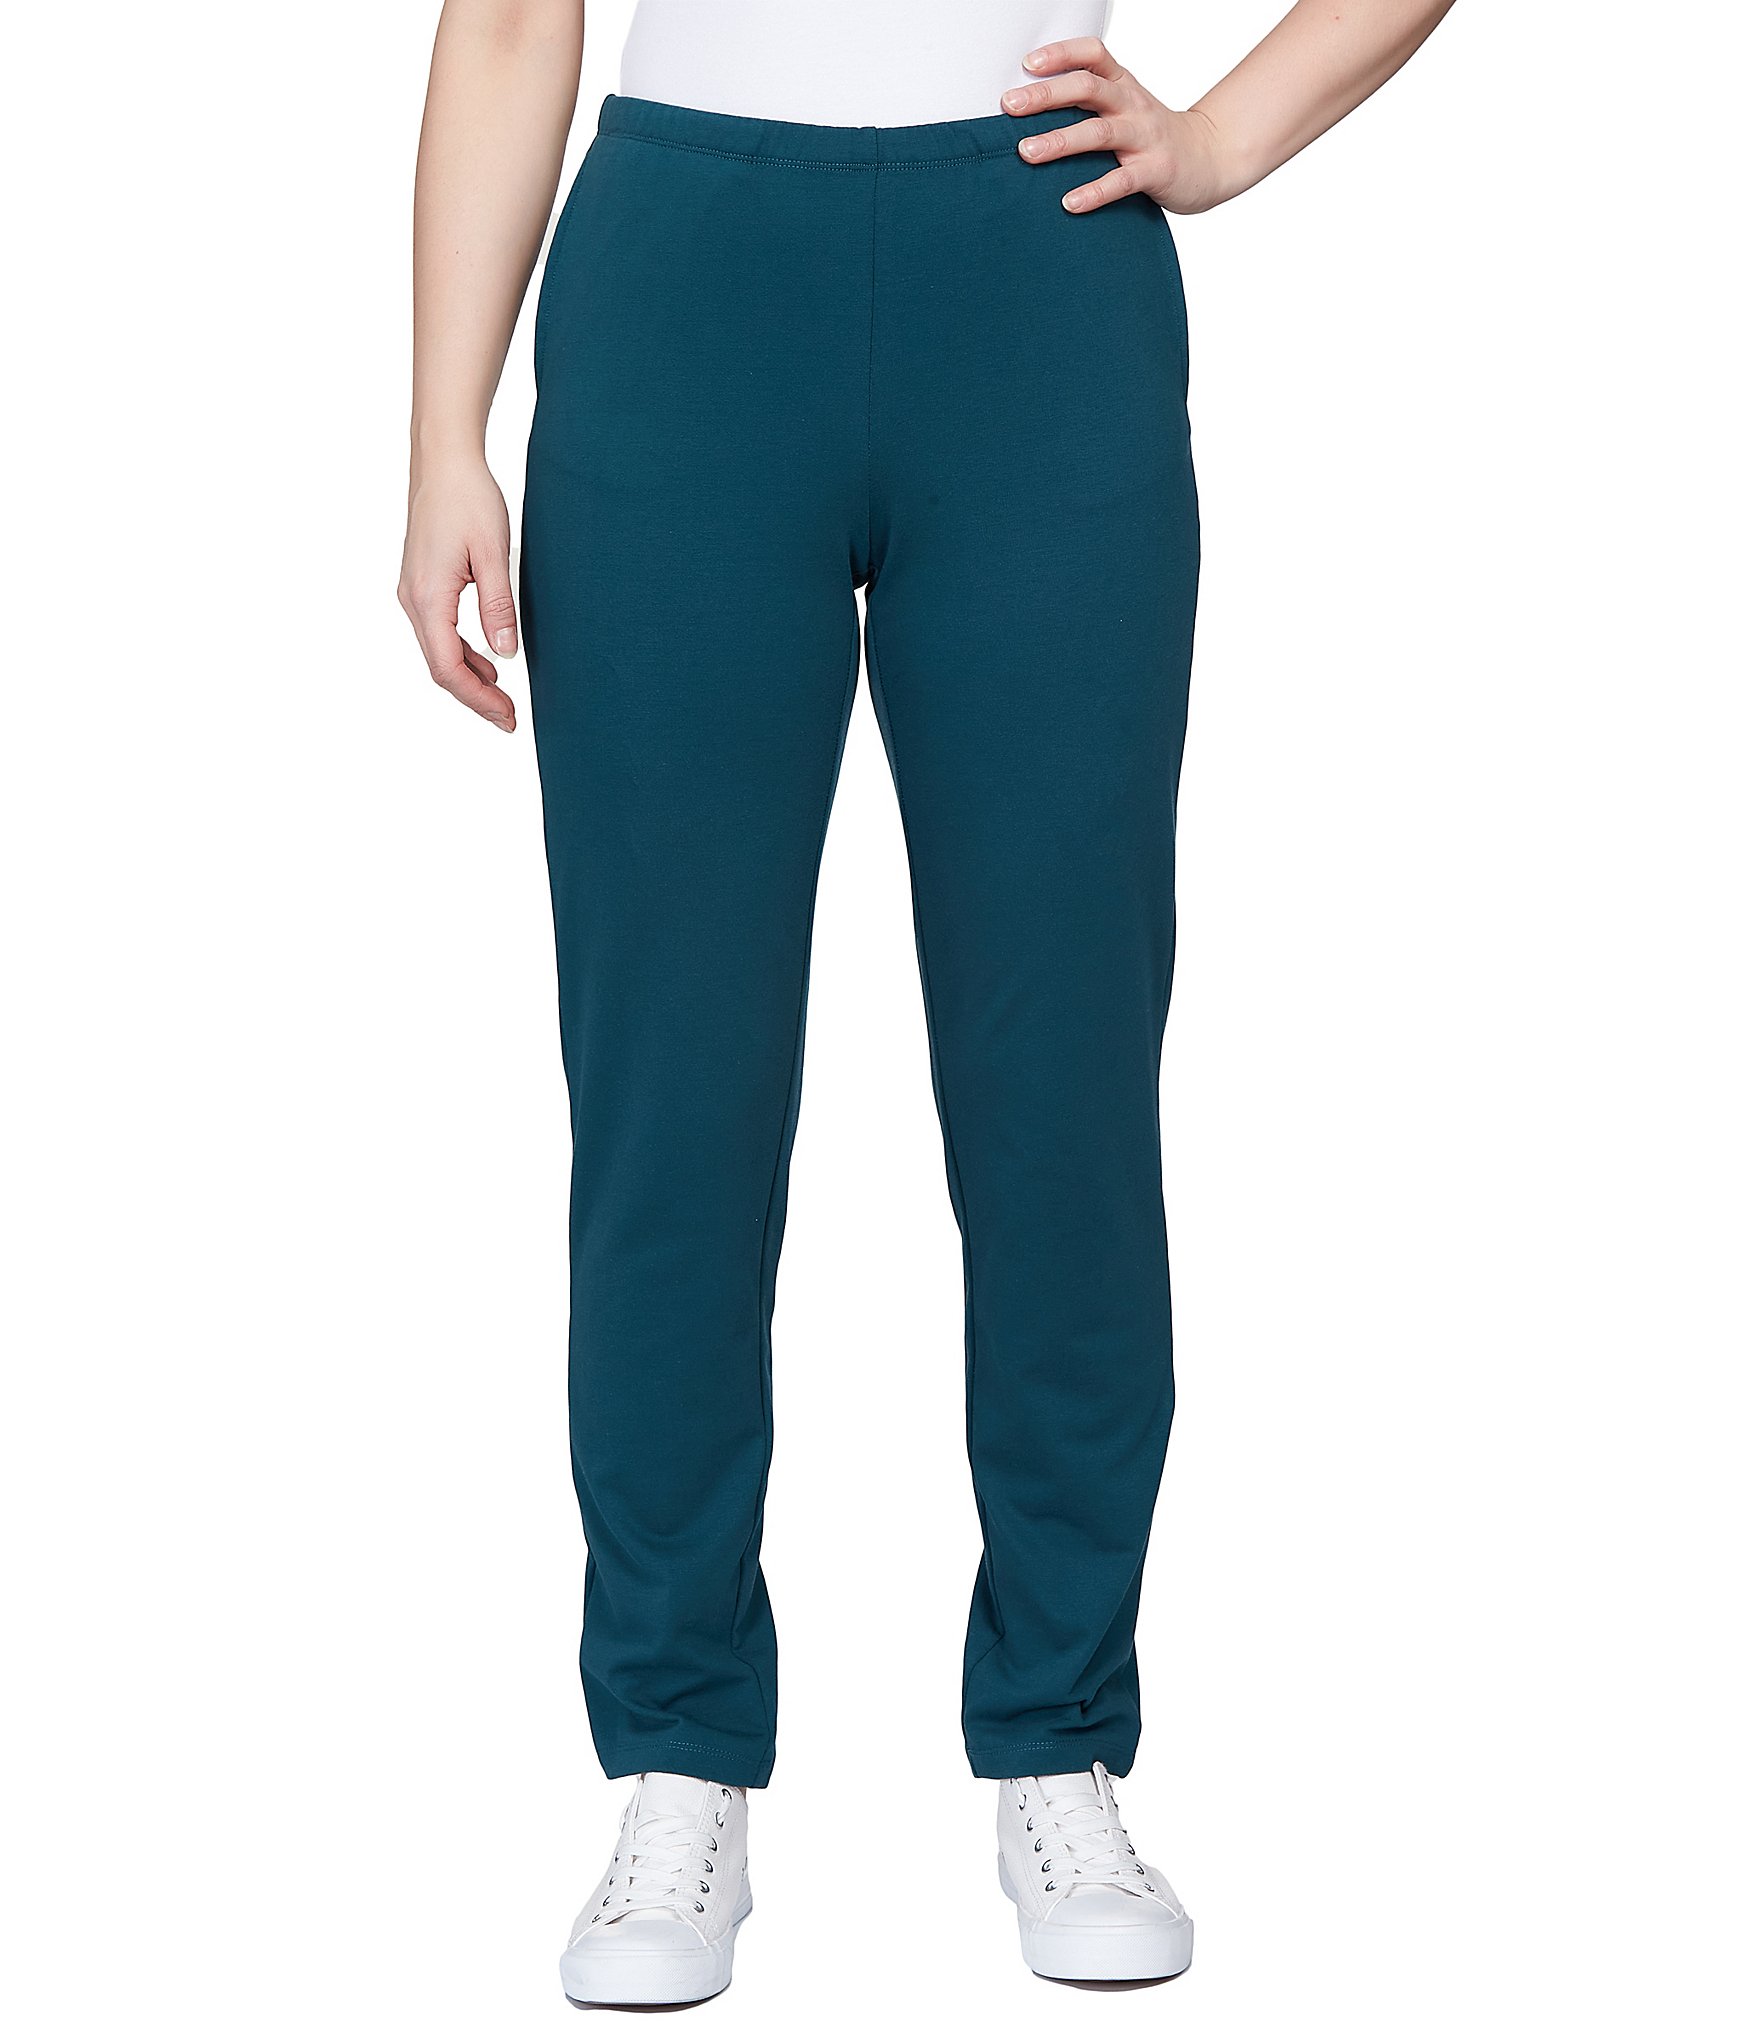 Ruby Rd. French Terry Knit Pull-On Pants | Dillard's